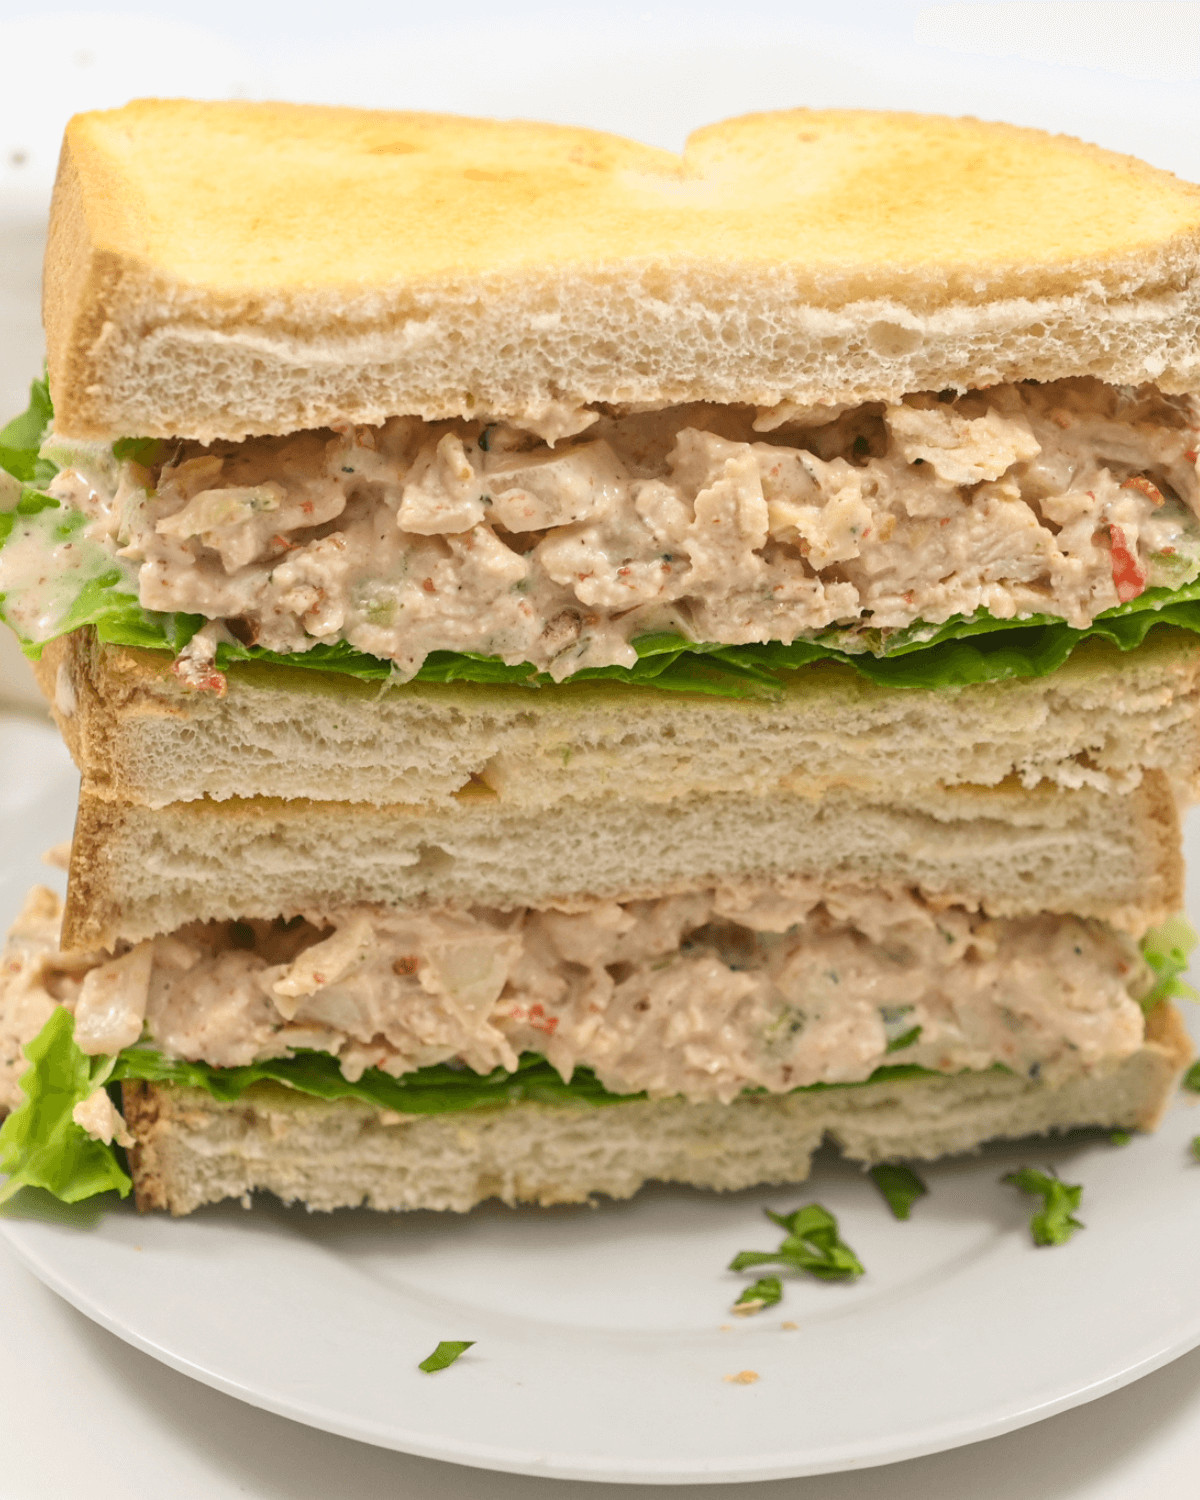 A multi-layered chipotle chicken salad sandwich with lettuce on white bread.